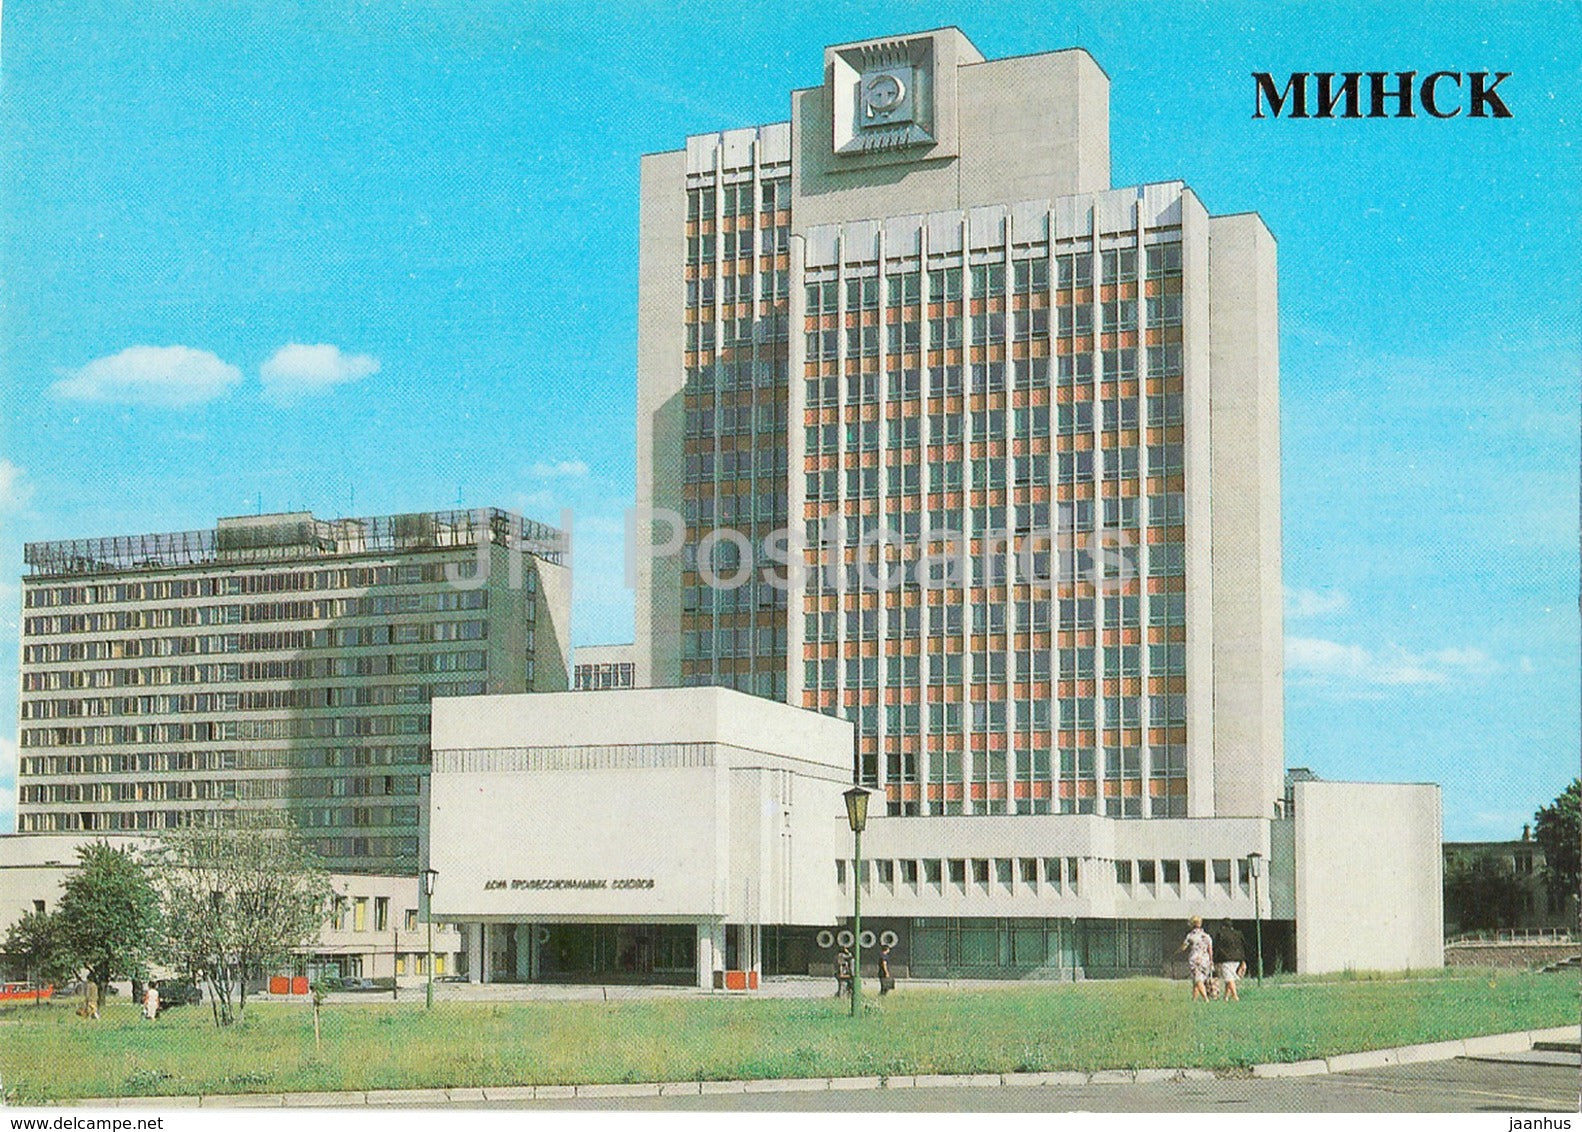 Minsk - The House of Trade Unions - 1985 - Belarus USSR - unused - JH Postcards